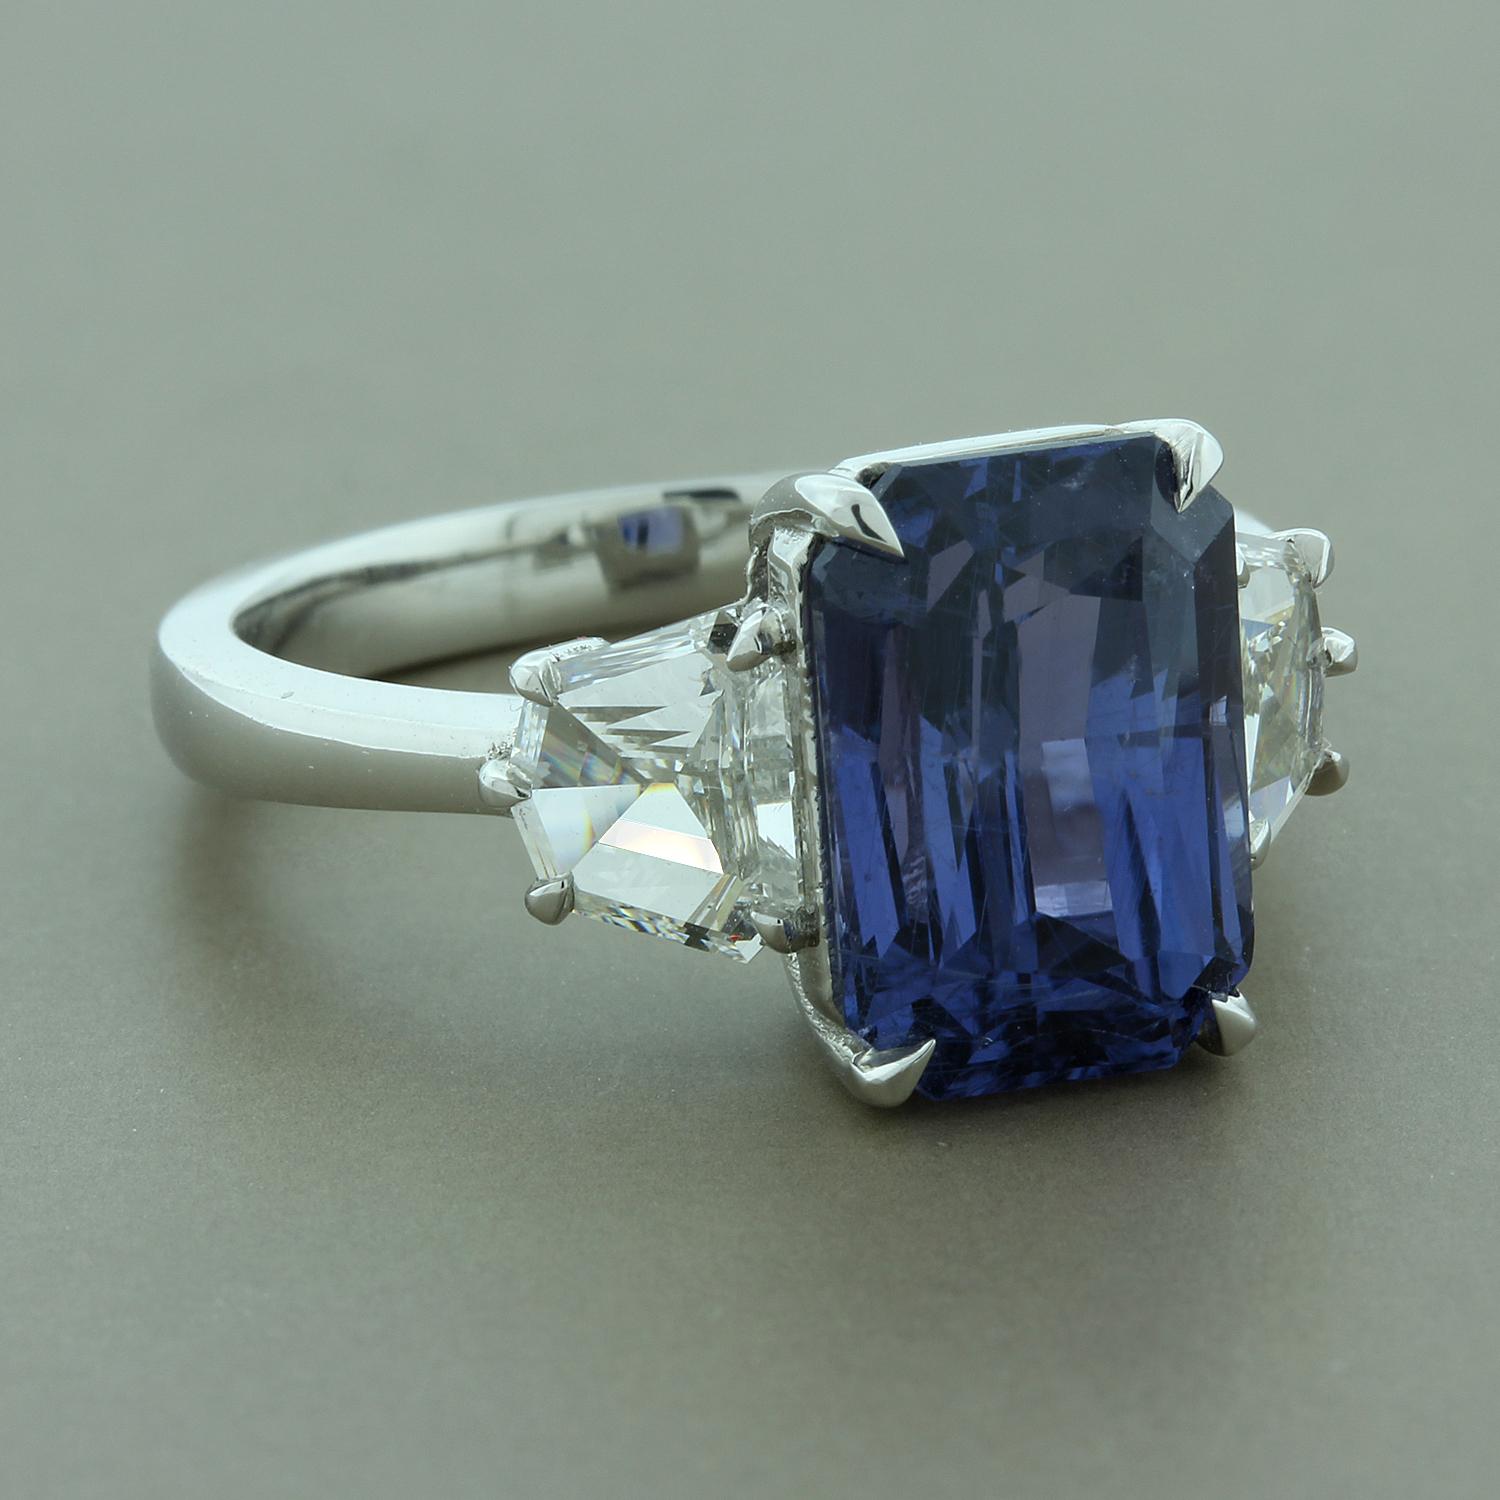 This classic 3-stone ring features a GIA certified 5.55 carat radiant cut color change sapphire. In daylight you will see a soft bluish violet color and under candlelight watch the sapphire deepen into a rich purple. There are two cadillac cut